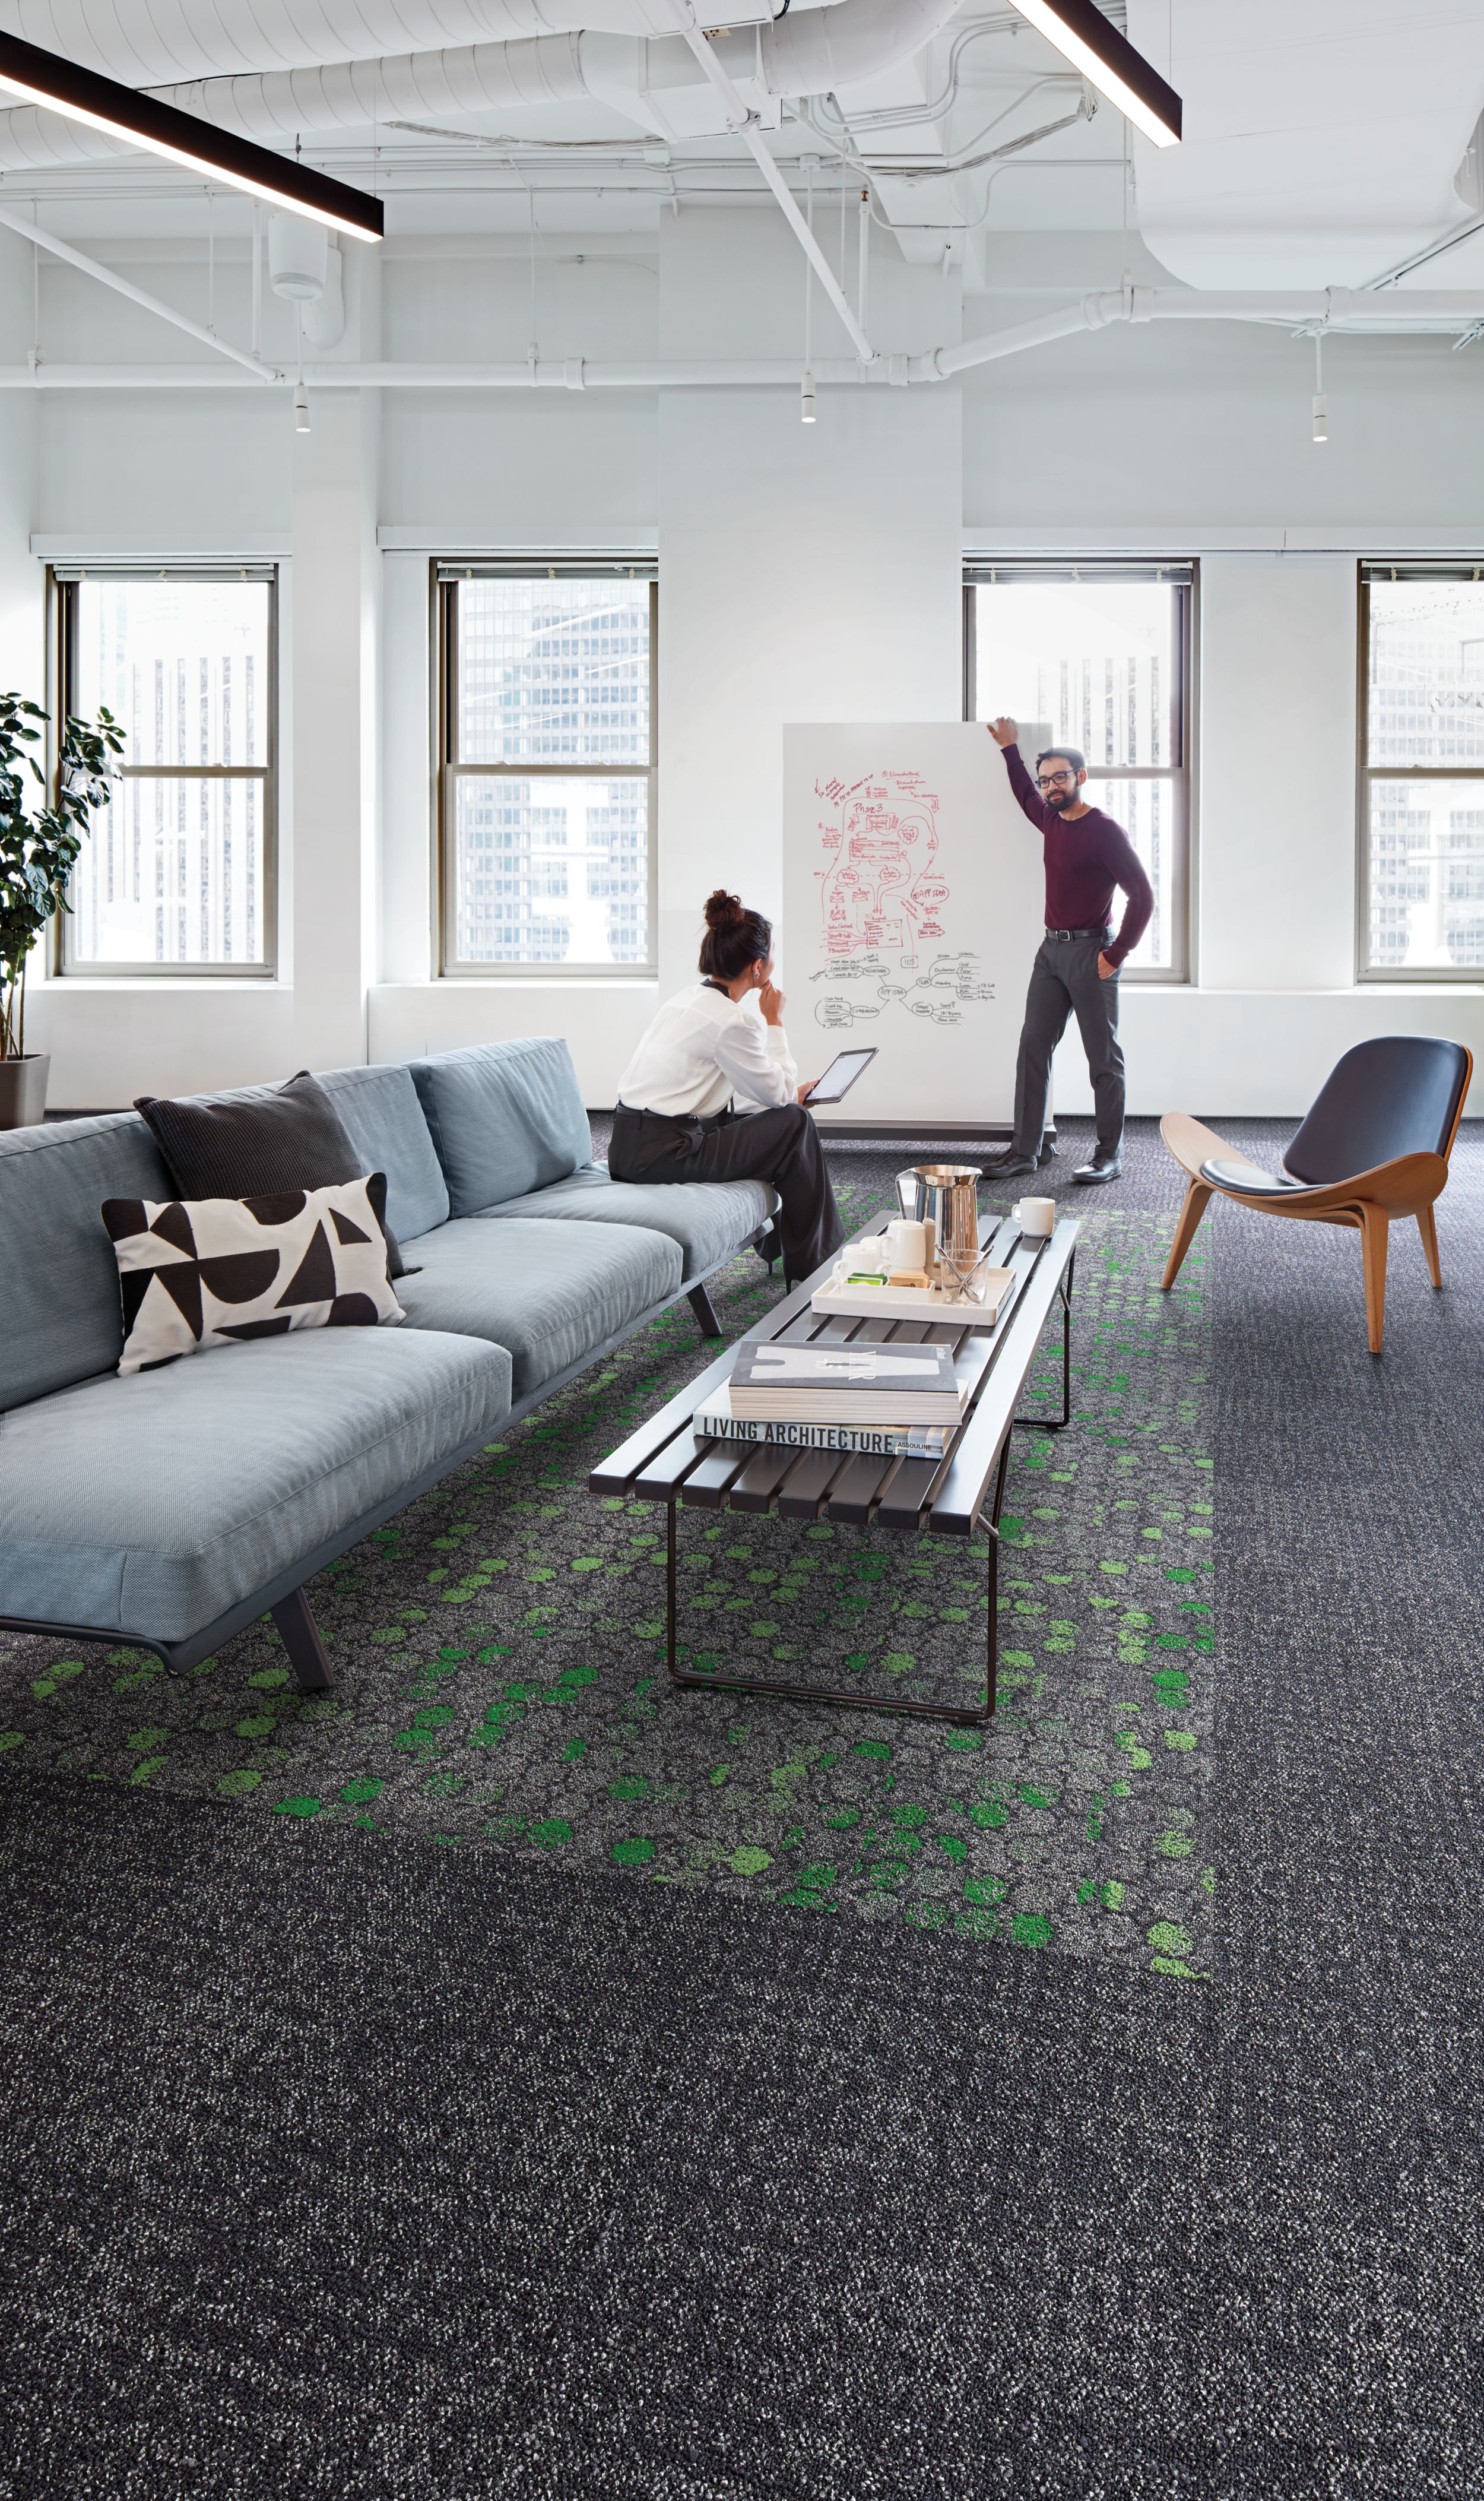 Interface Broome Street and Wheler Street in open office area with people numéro d’image 10